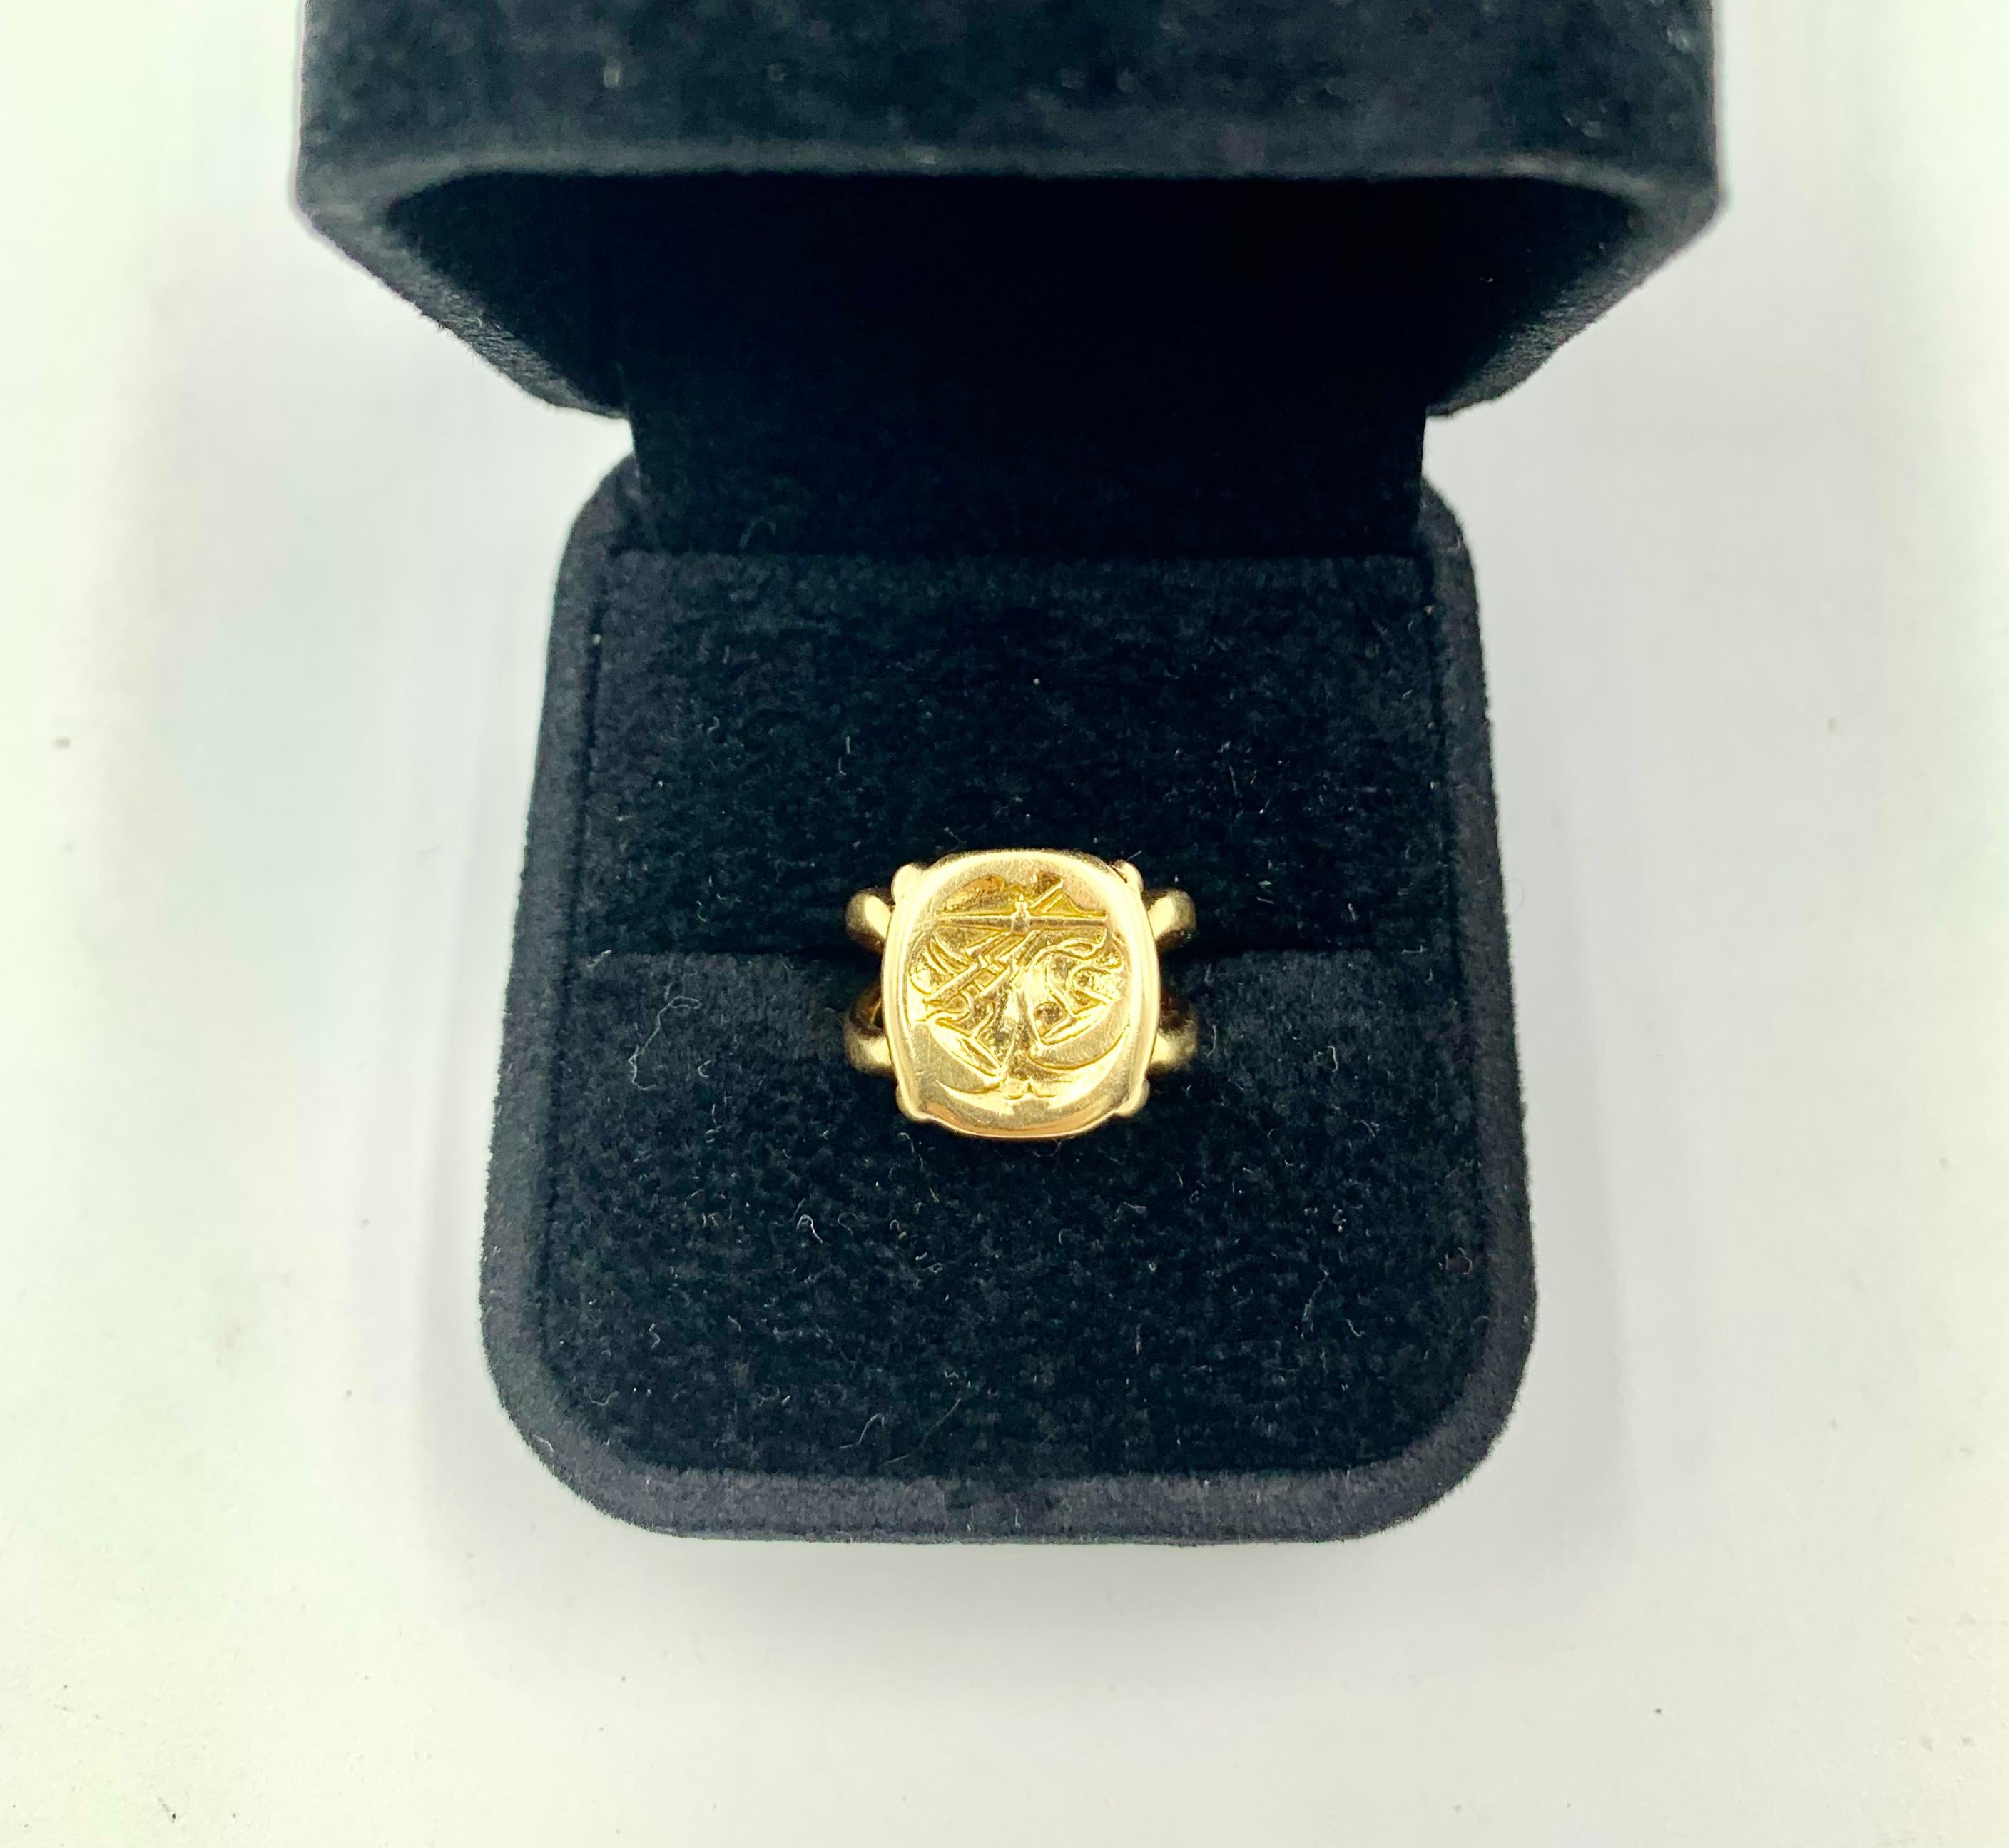 Rare vintage Van Cleef & Arpels 18K gold Libra Zodiac signet ring depicting artistic Scales of Balance and a pair of lightning bolts denoting Air in the intaglio technique. 
Size 4, perfect size for a pinky ring.
Signed and numbered on the interior,